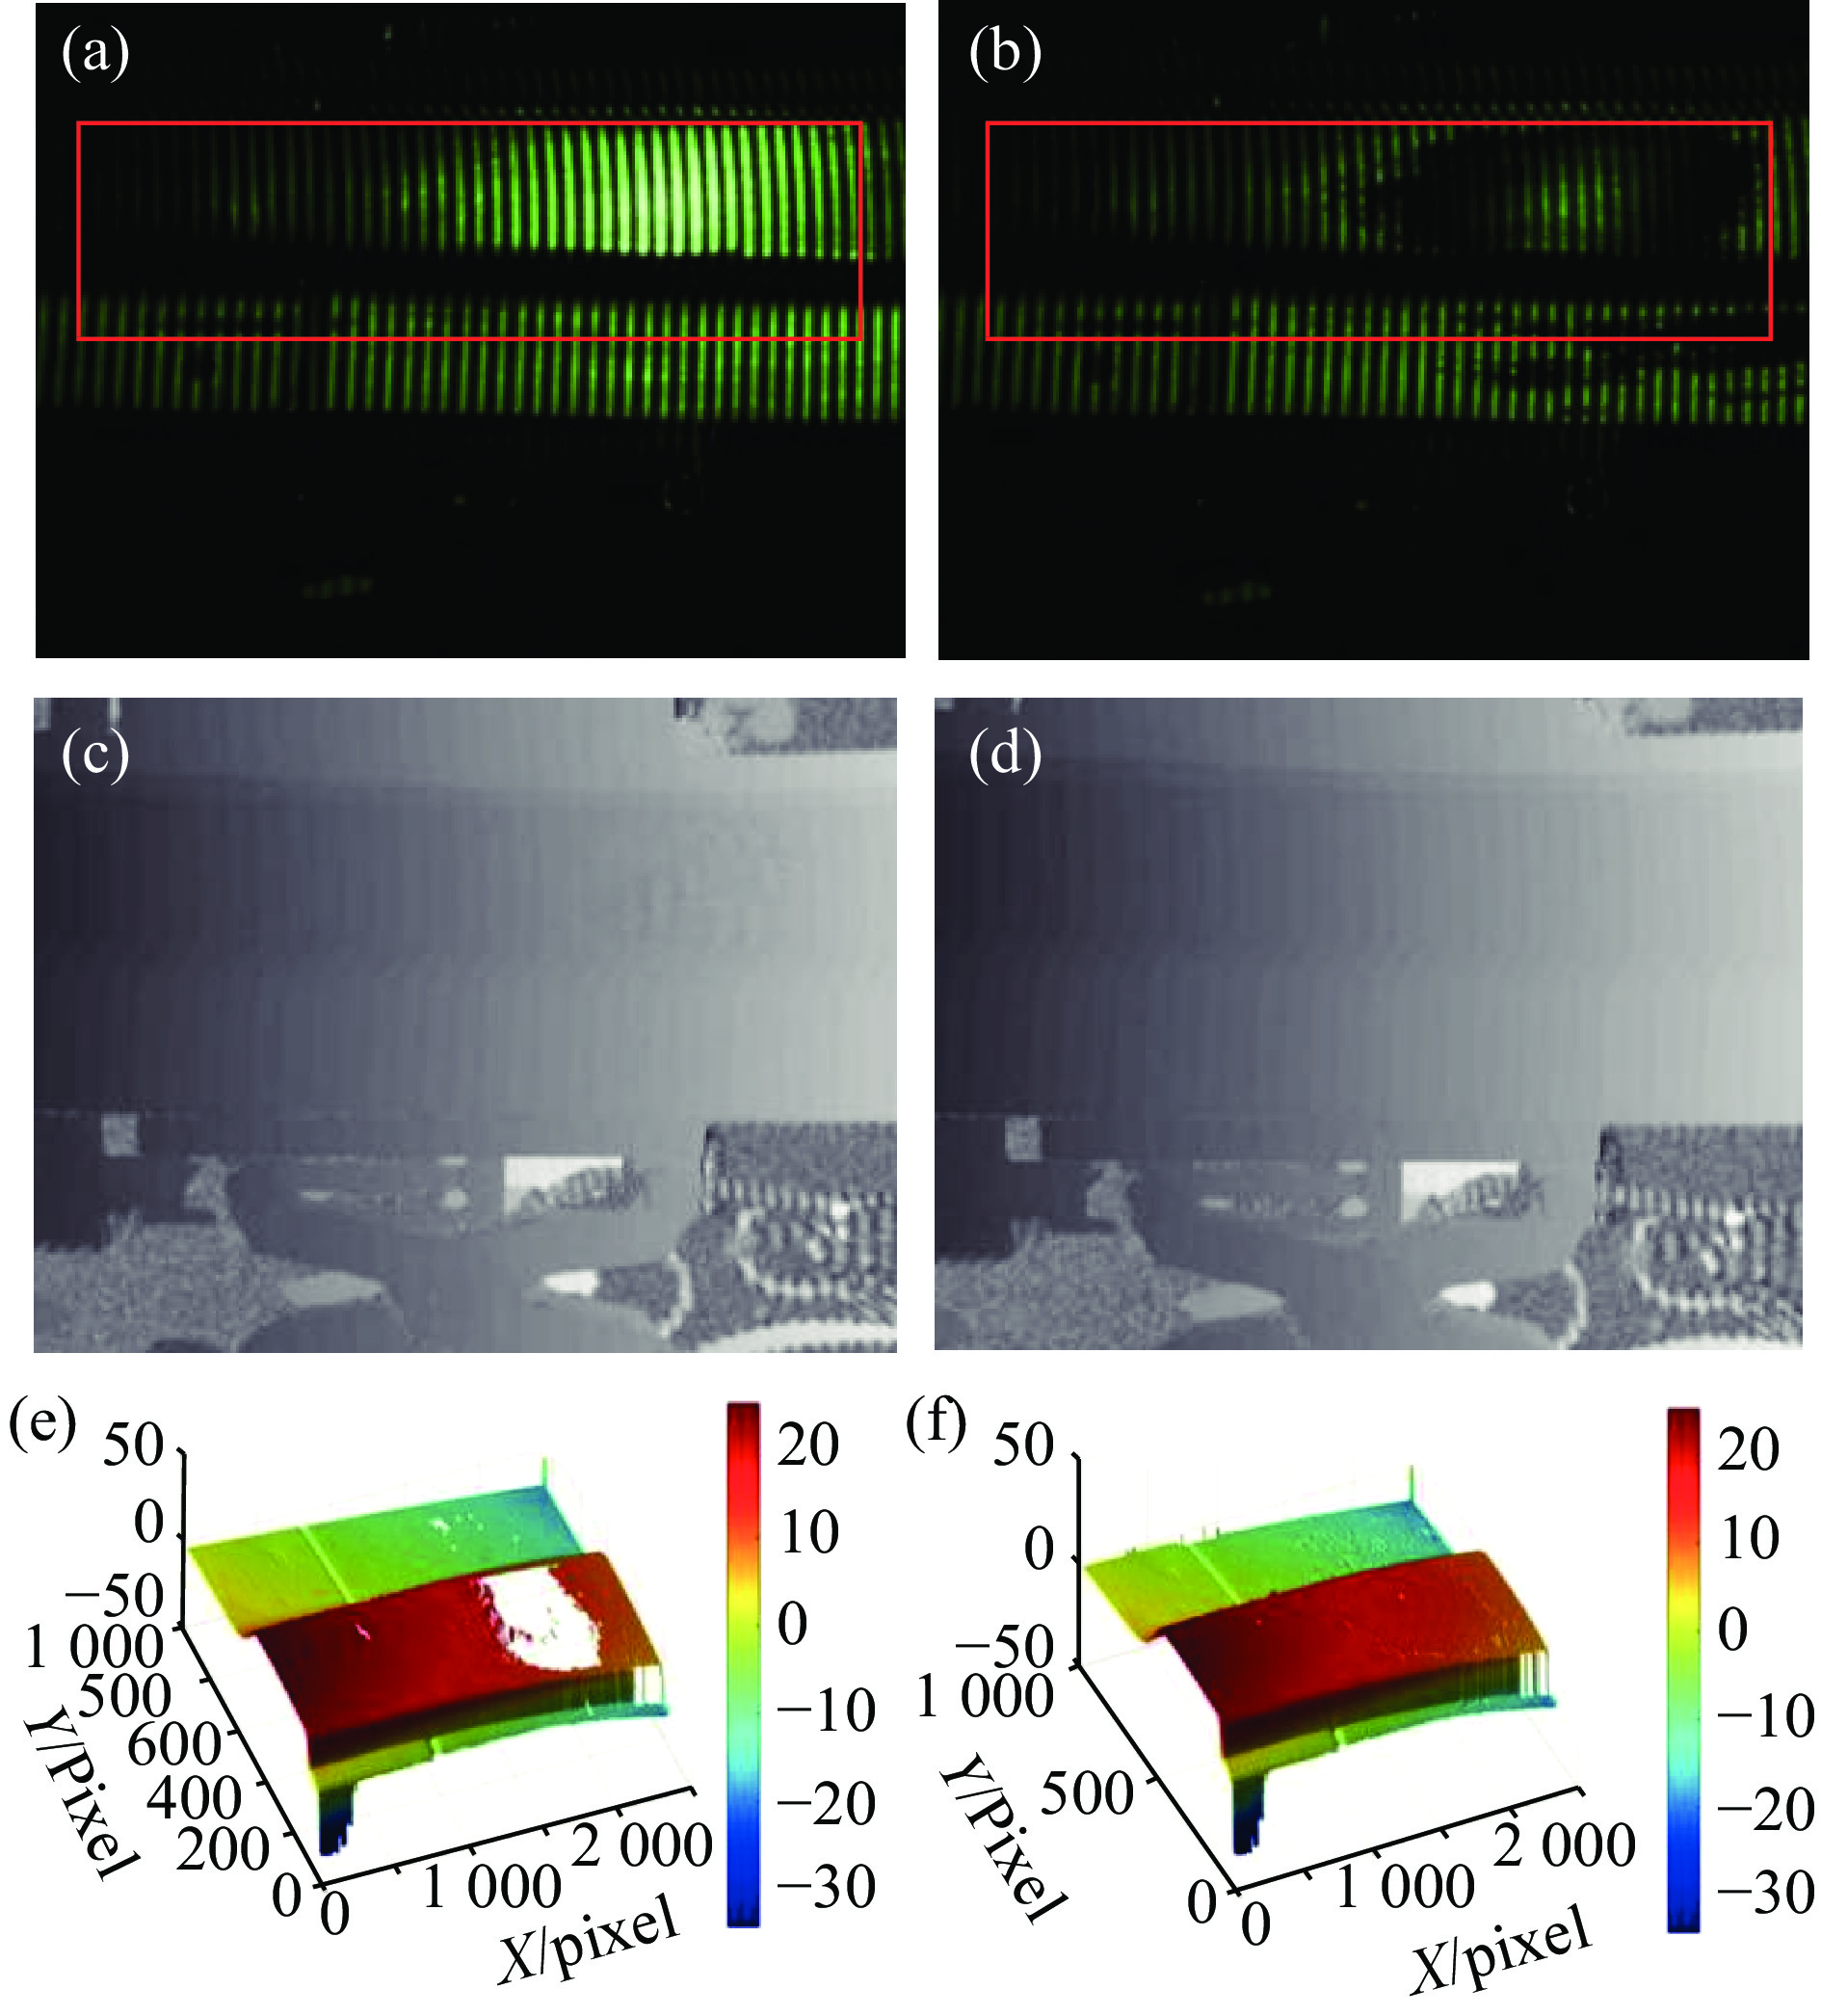 The measurement results of the car door by using methods proposed by Chen[41] et al; (a) captured single intensity fringe; (b) absolute phase map from (a); (c) 3D data calculated by using a single intensity fringe pattern; (d) captured adaptive fringe; (e) absolute phase map from (d); (f) 3D data calculated by using an adaptive fringe pattern